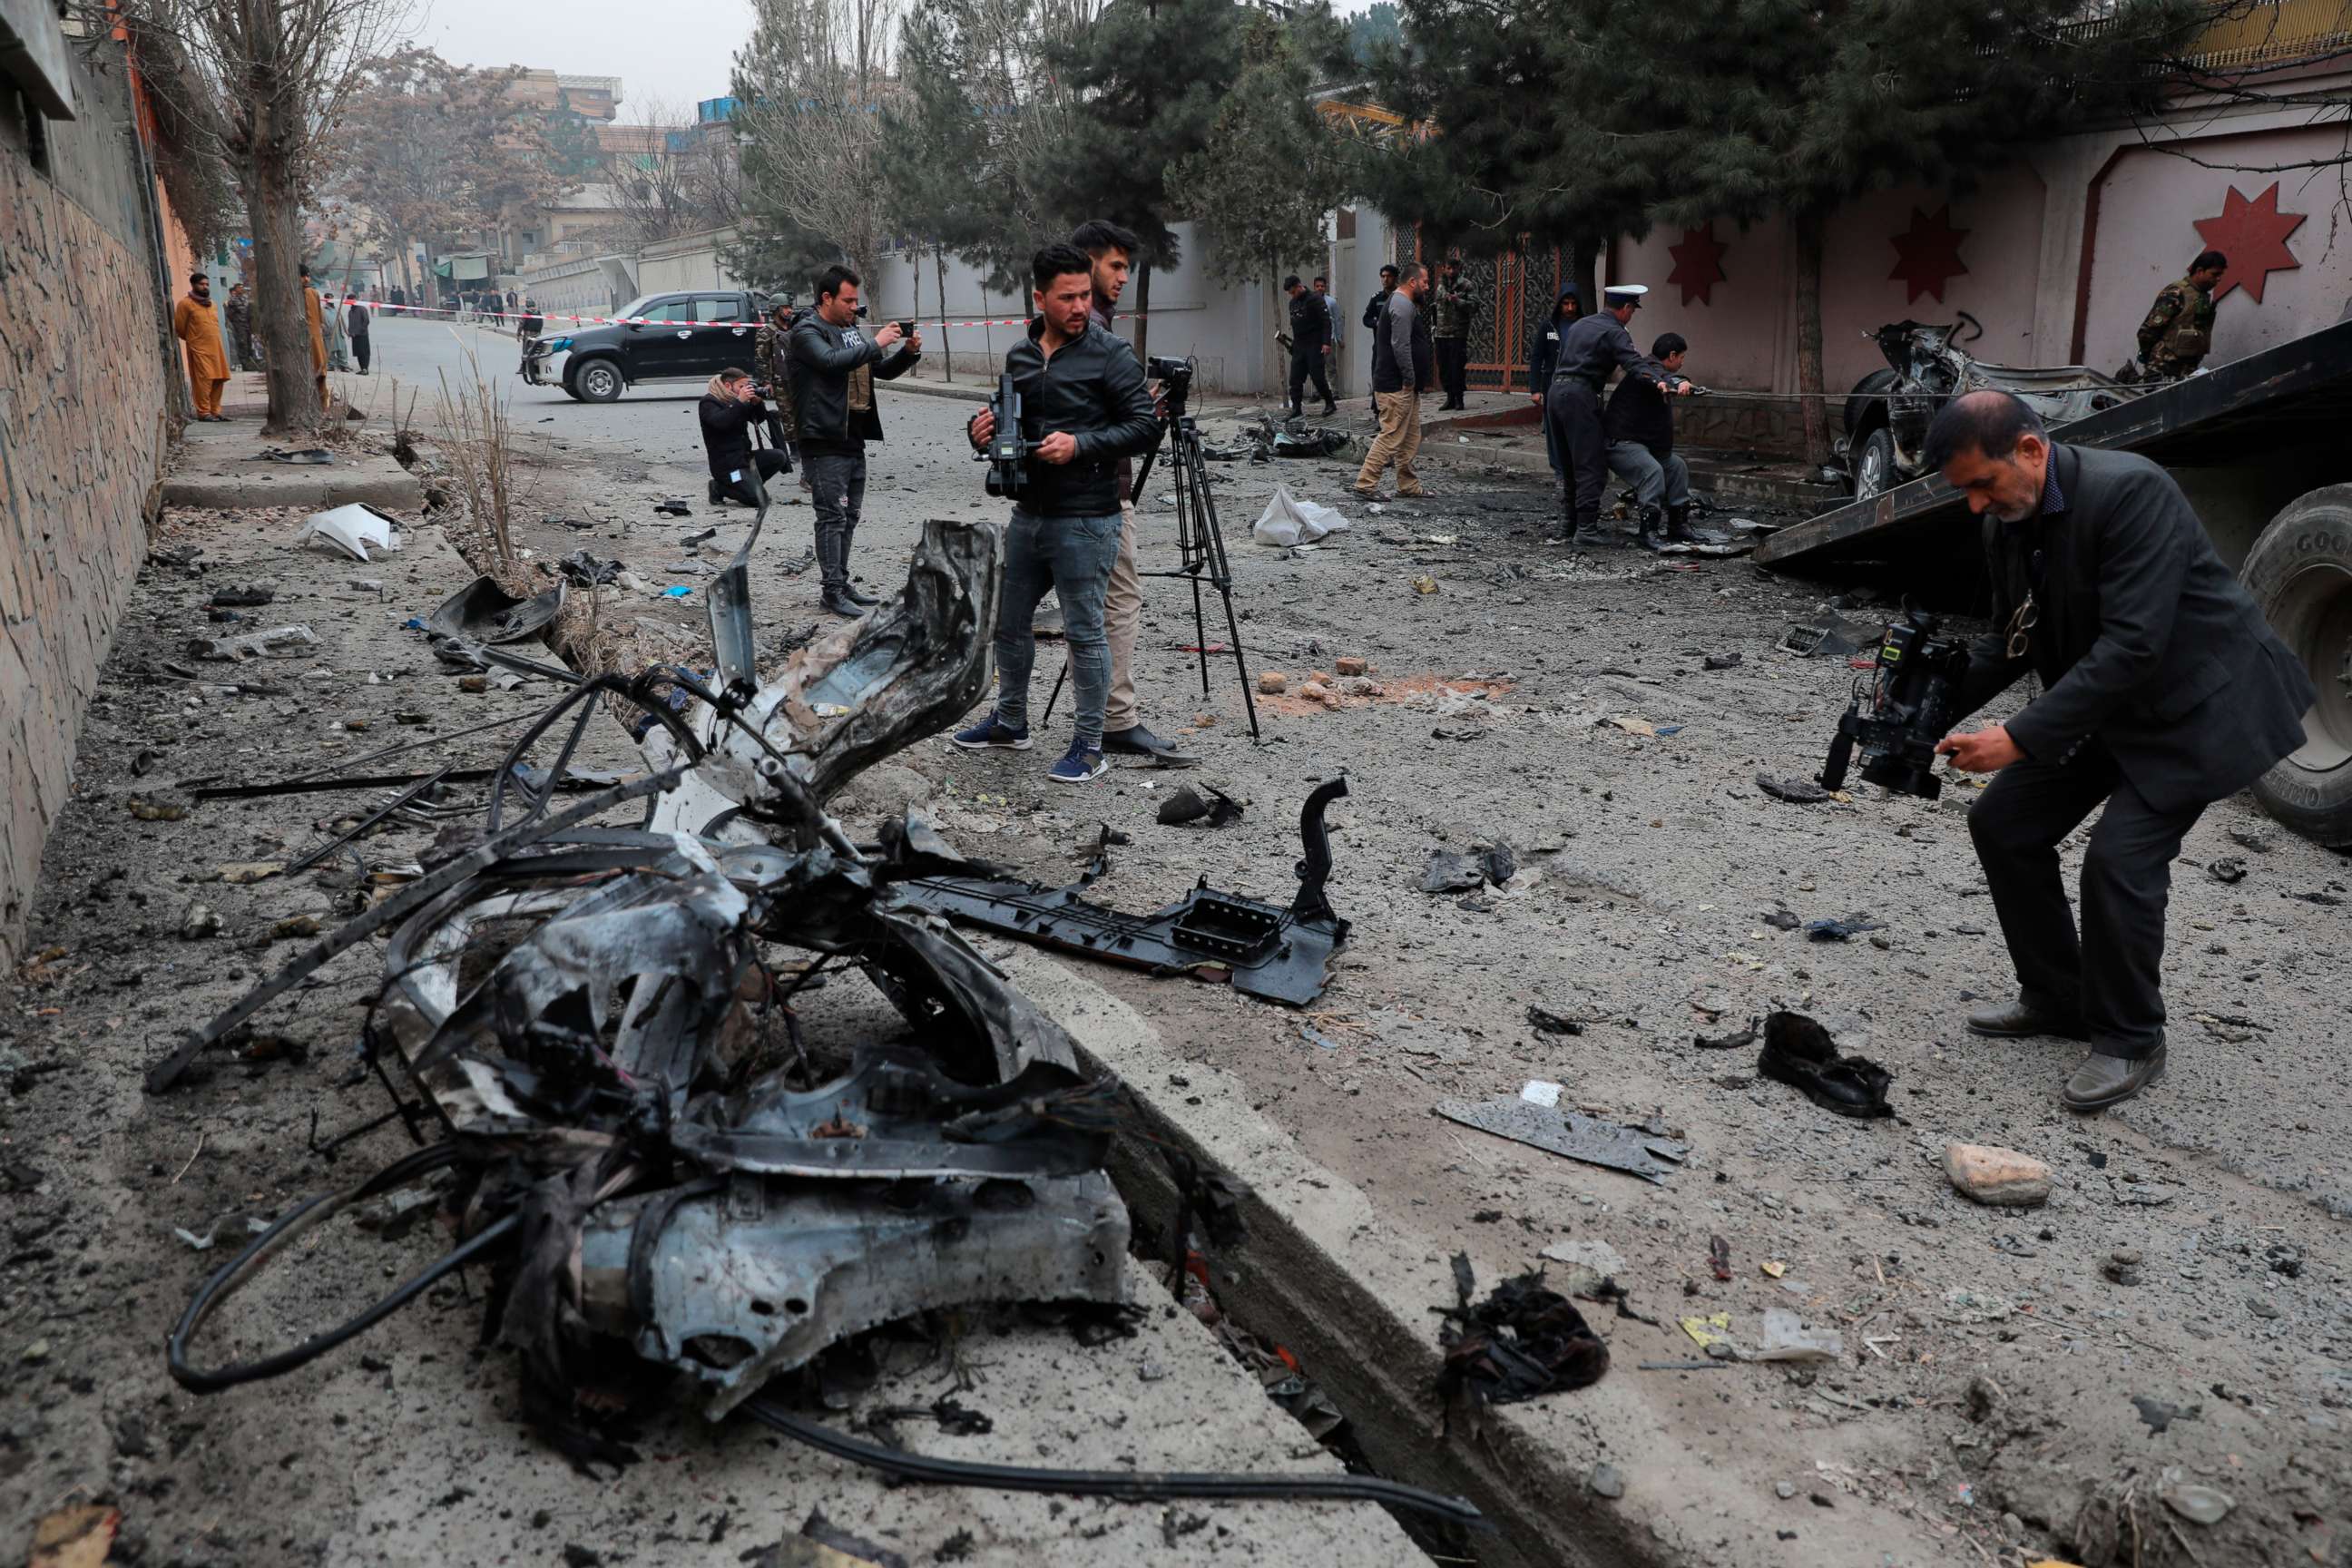 PHOTO: Afghan journalists film at the site of a bombing attack in Kabul, Afghanistan, Feb. 20, 2021.